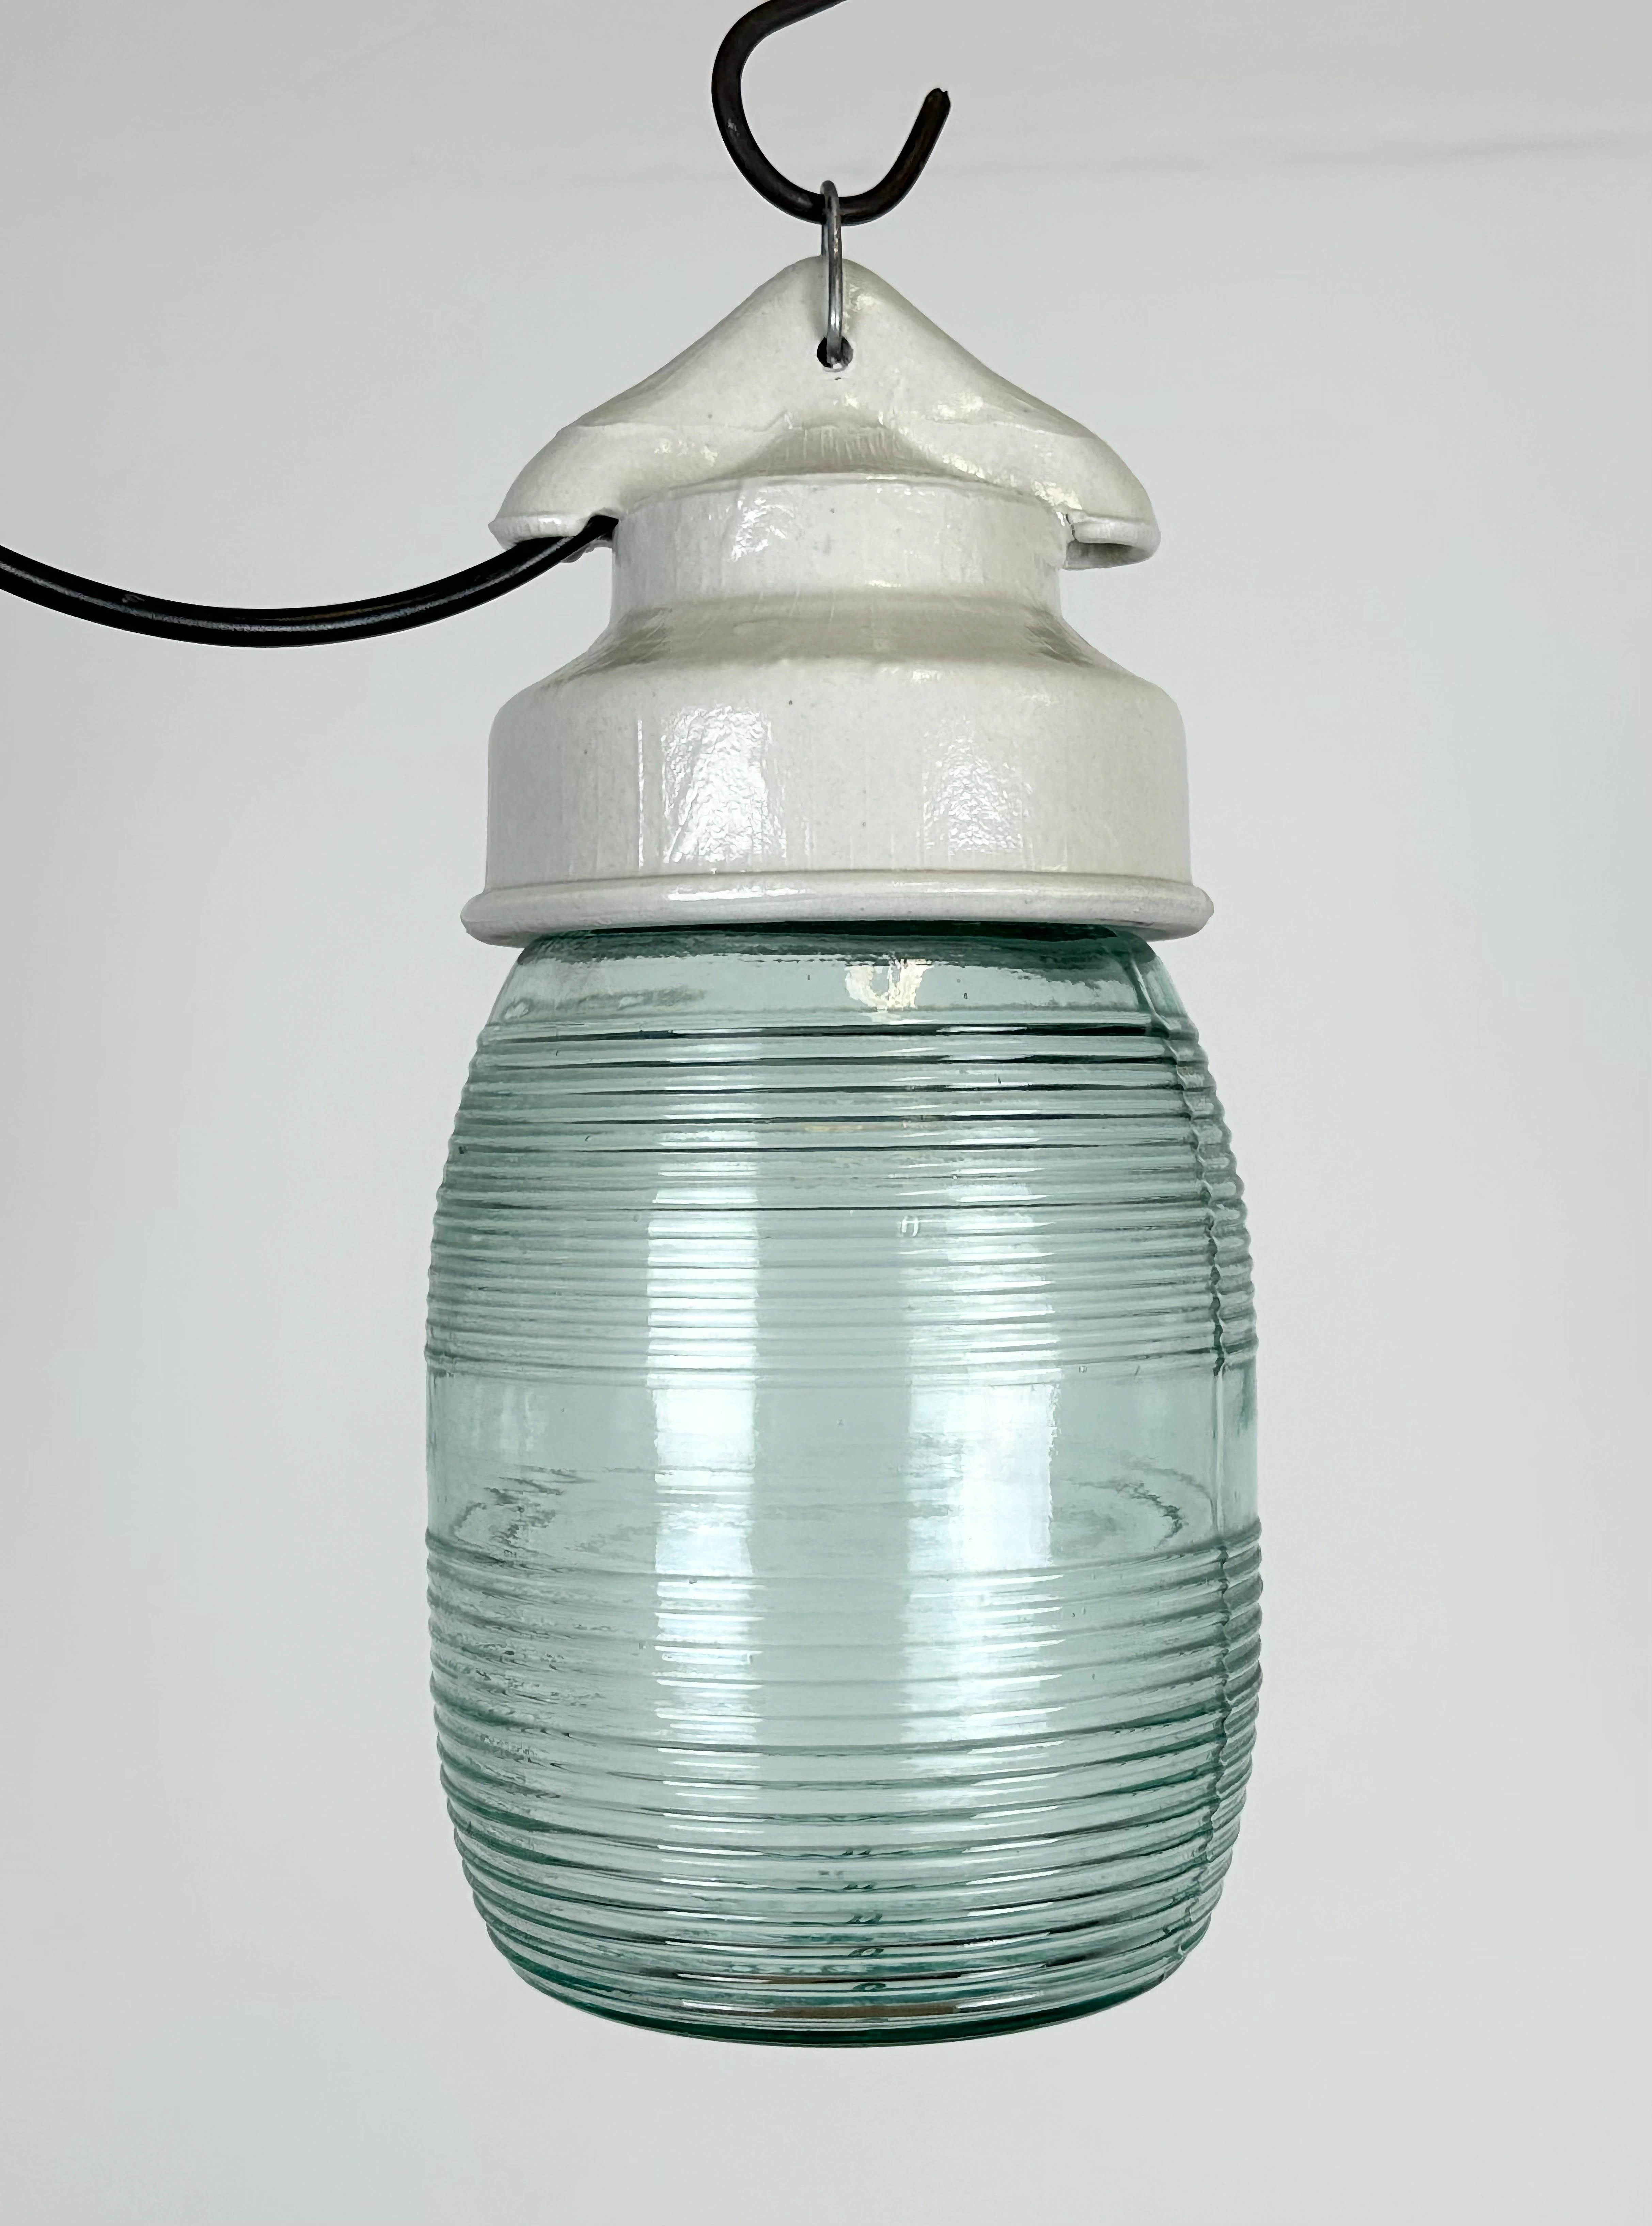 Russian Industrial White Porcelain Pendant Light with Ribbed Glass, 1970s For Sale